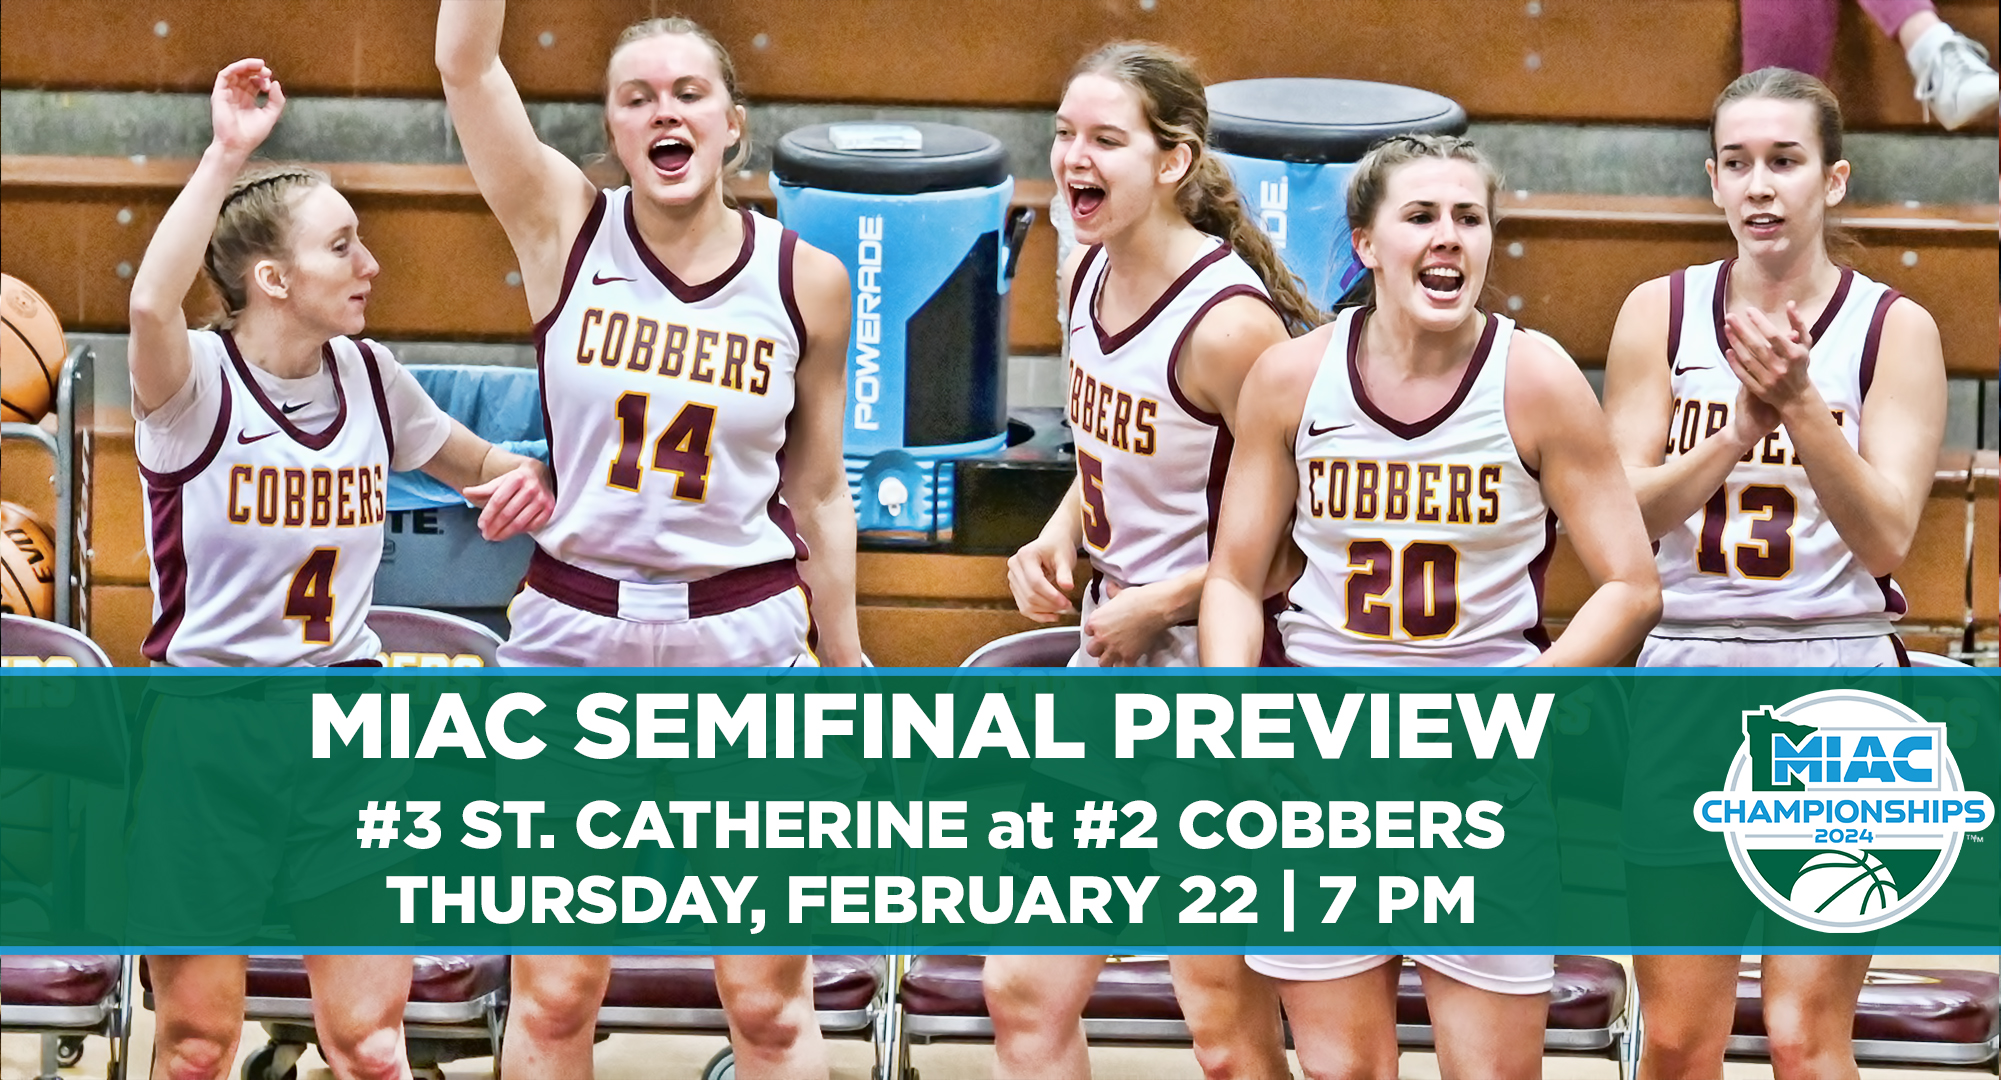 #2 Concordia hosts #3 St. Catherine in the semifinals of the MIAC Tournament on Thursday, Feb. 22 at 7 p.m.